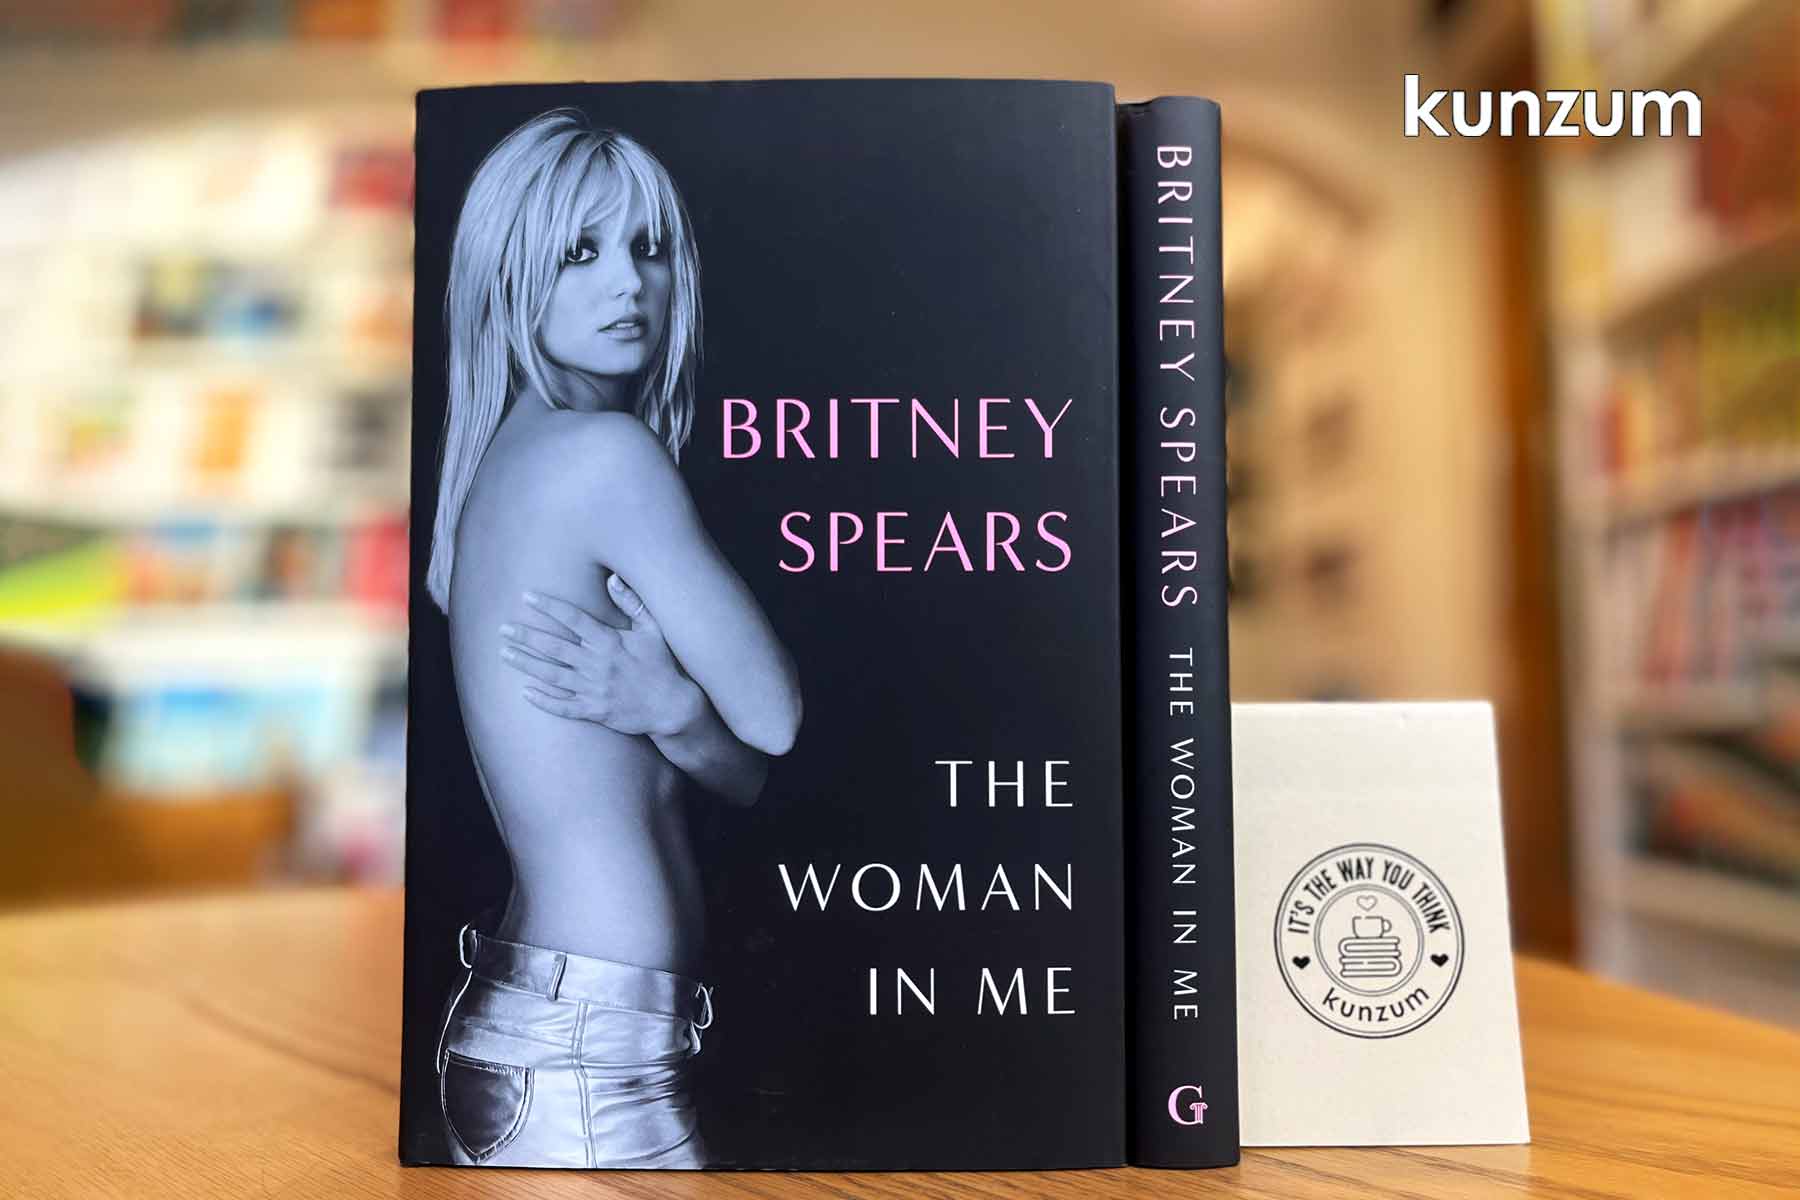 Book Review: The Woman in Me by Britney Spears is a Raging Memoir with Startling Revelations